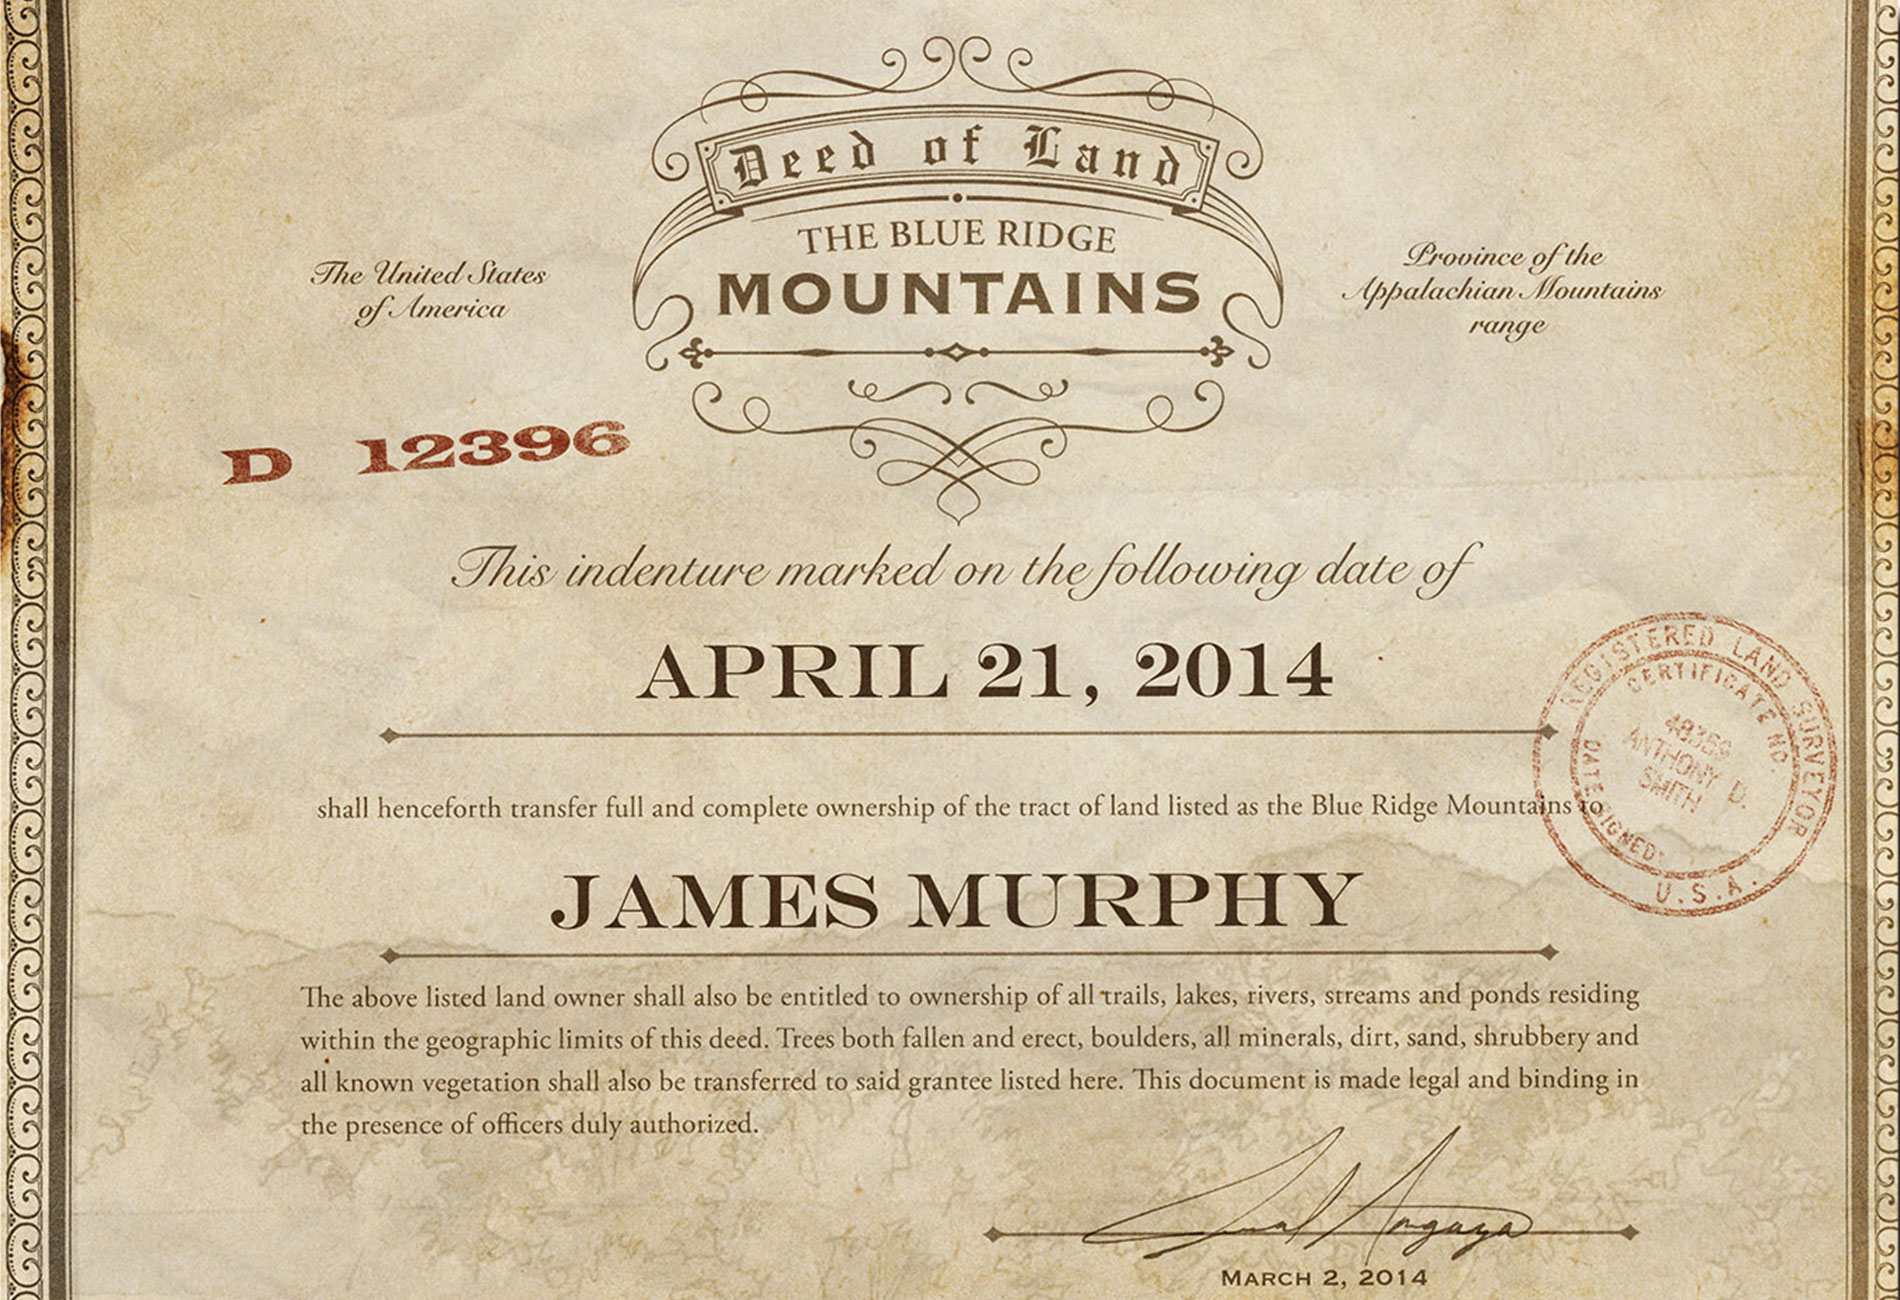 certificate of deed of land for the blue ridge mountains to James Murphy